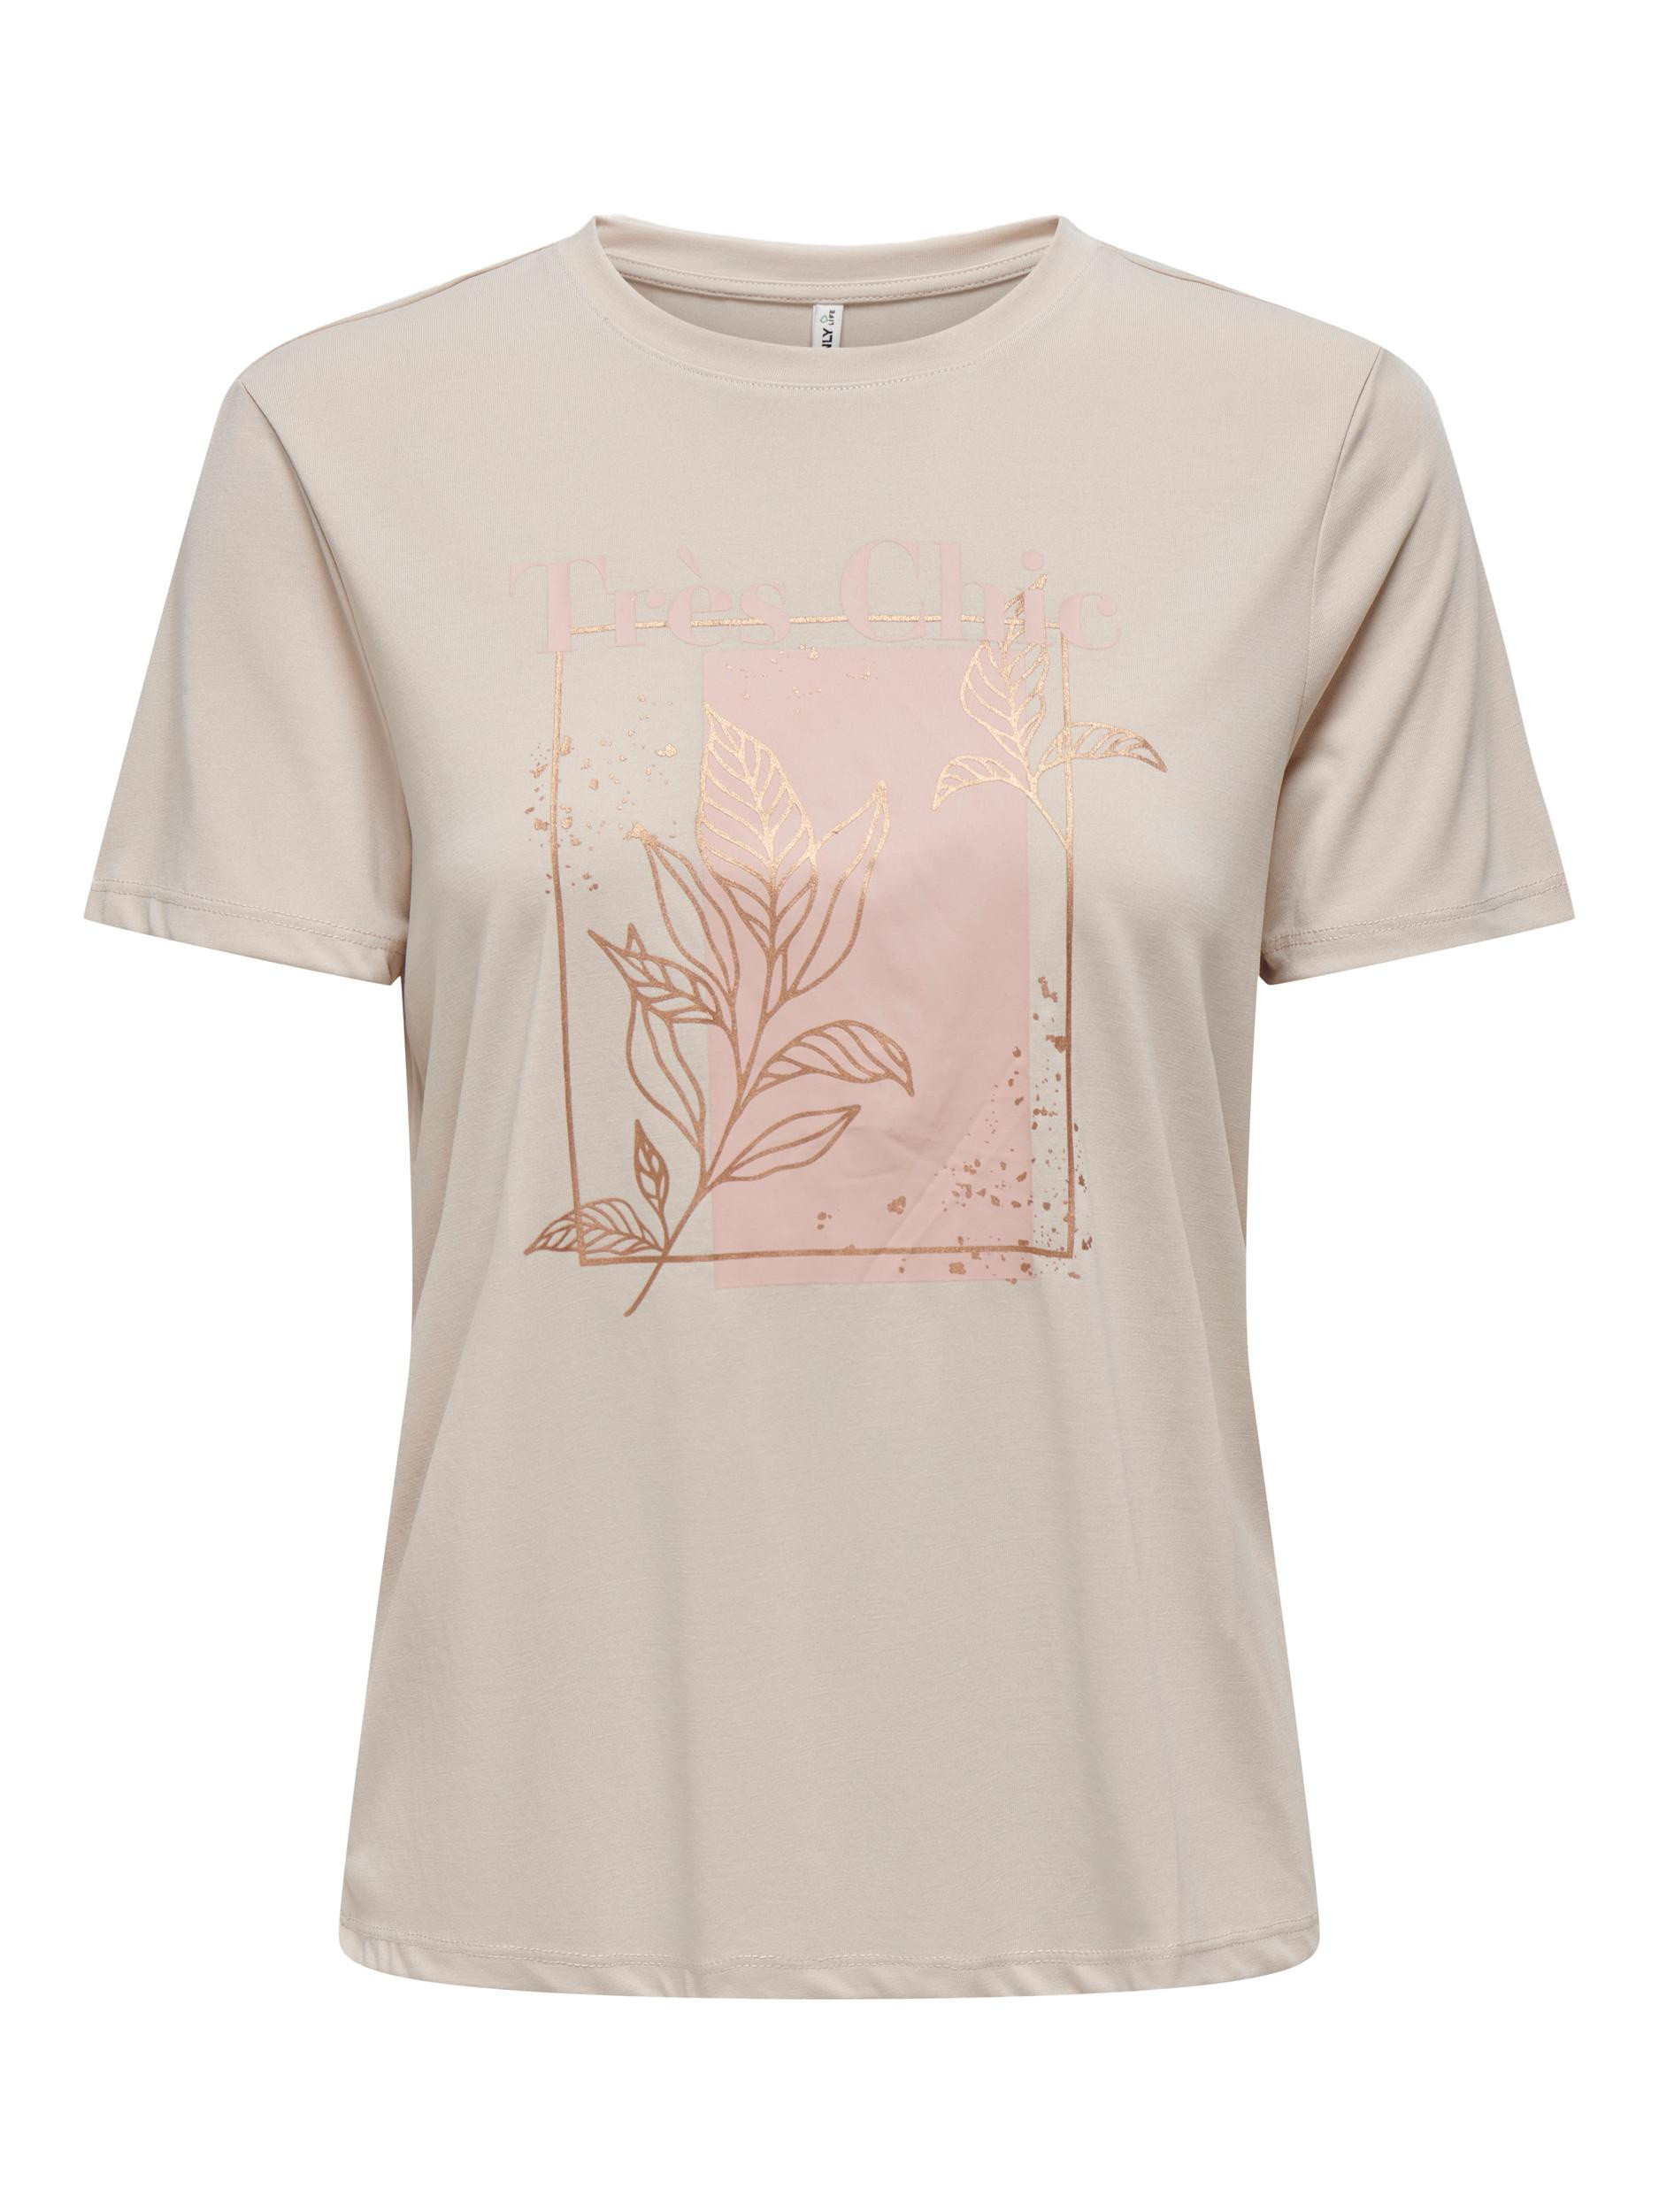 Only - T-shirt regular fit con stampa, Beige, large image number 0